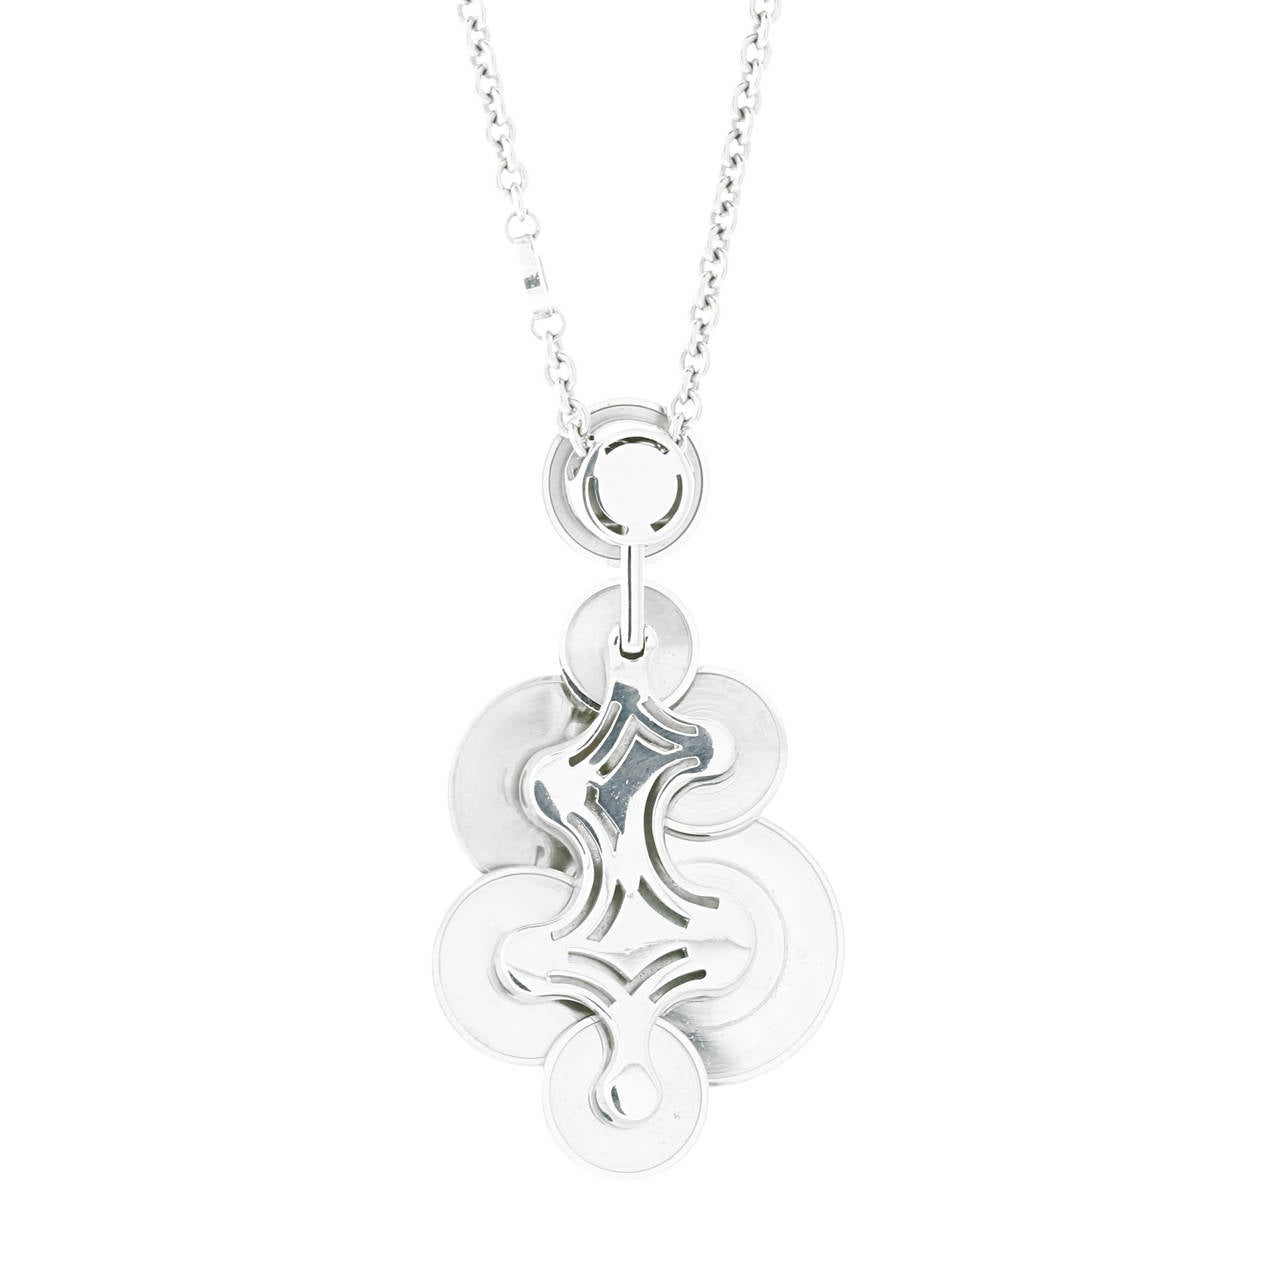 18k White Gold circles coalesce into an entrancing pattern on the pendant of this exceptional necklace from Bulgari's Cicladi collection. Dual BULGARI hallmarks are engraved into the faces of the two most prominent circles, as well as on several